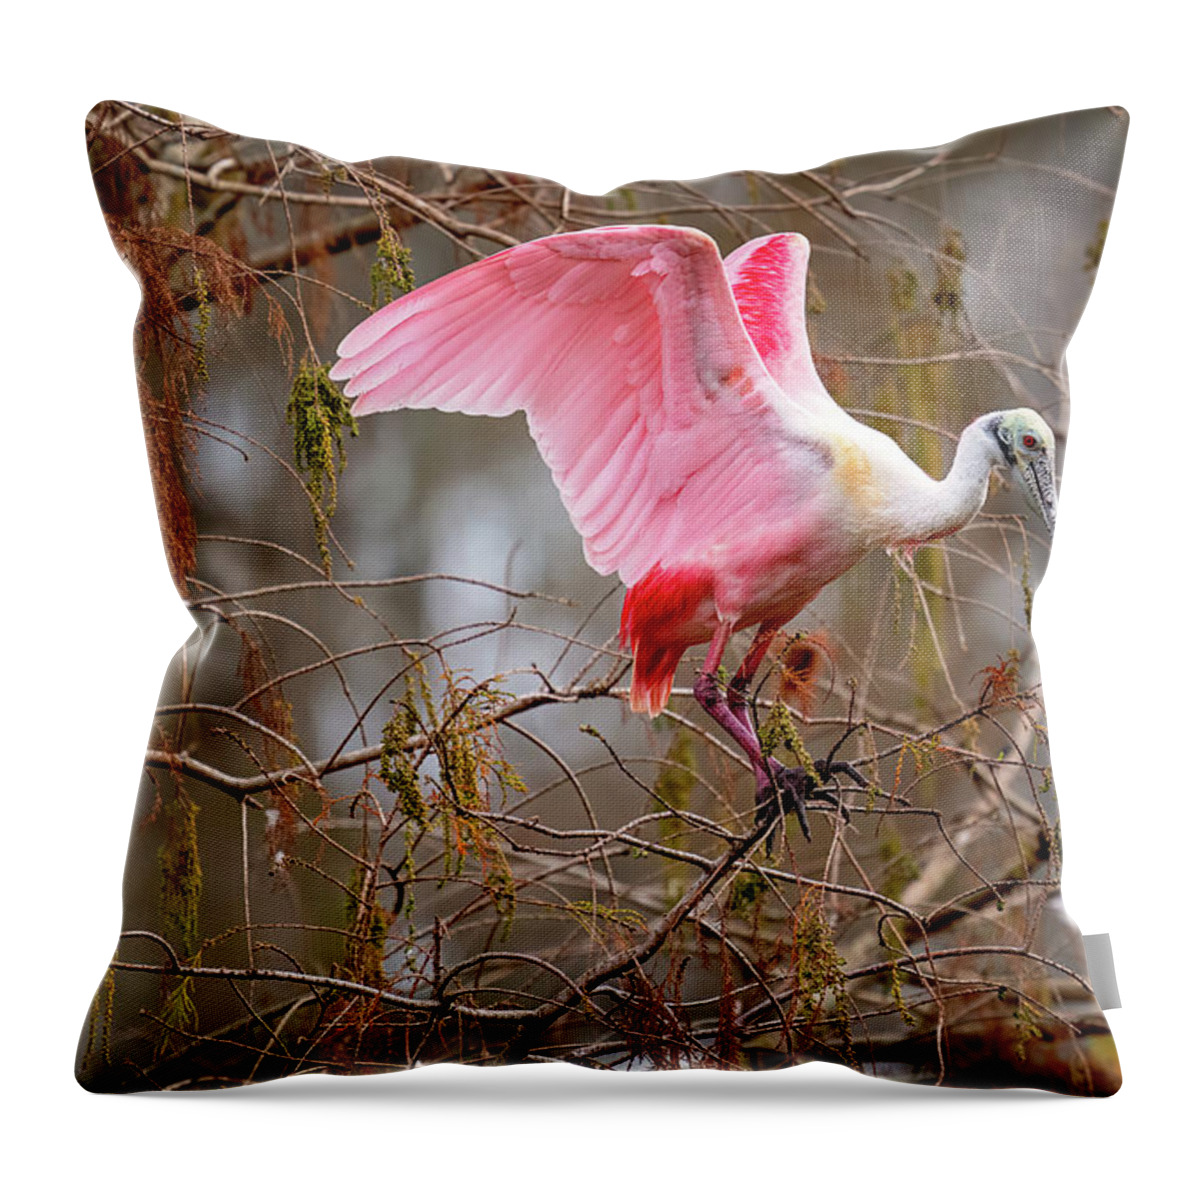  Throw Pillow featuring the photograph Spoonbill Nesting by Norman Peay